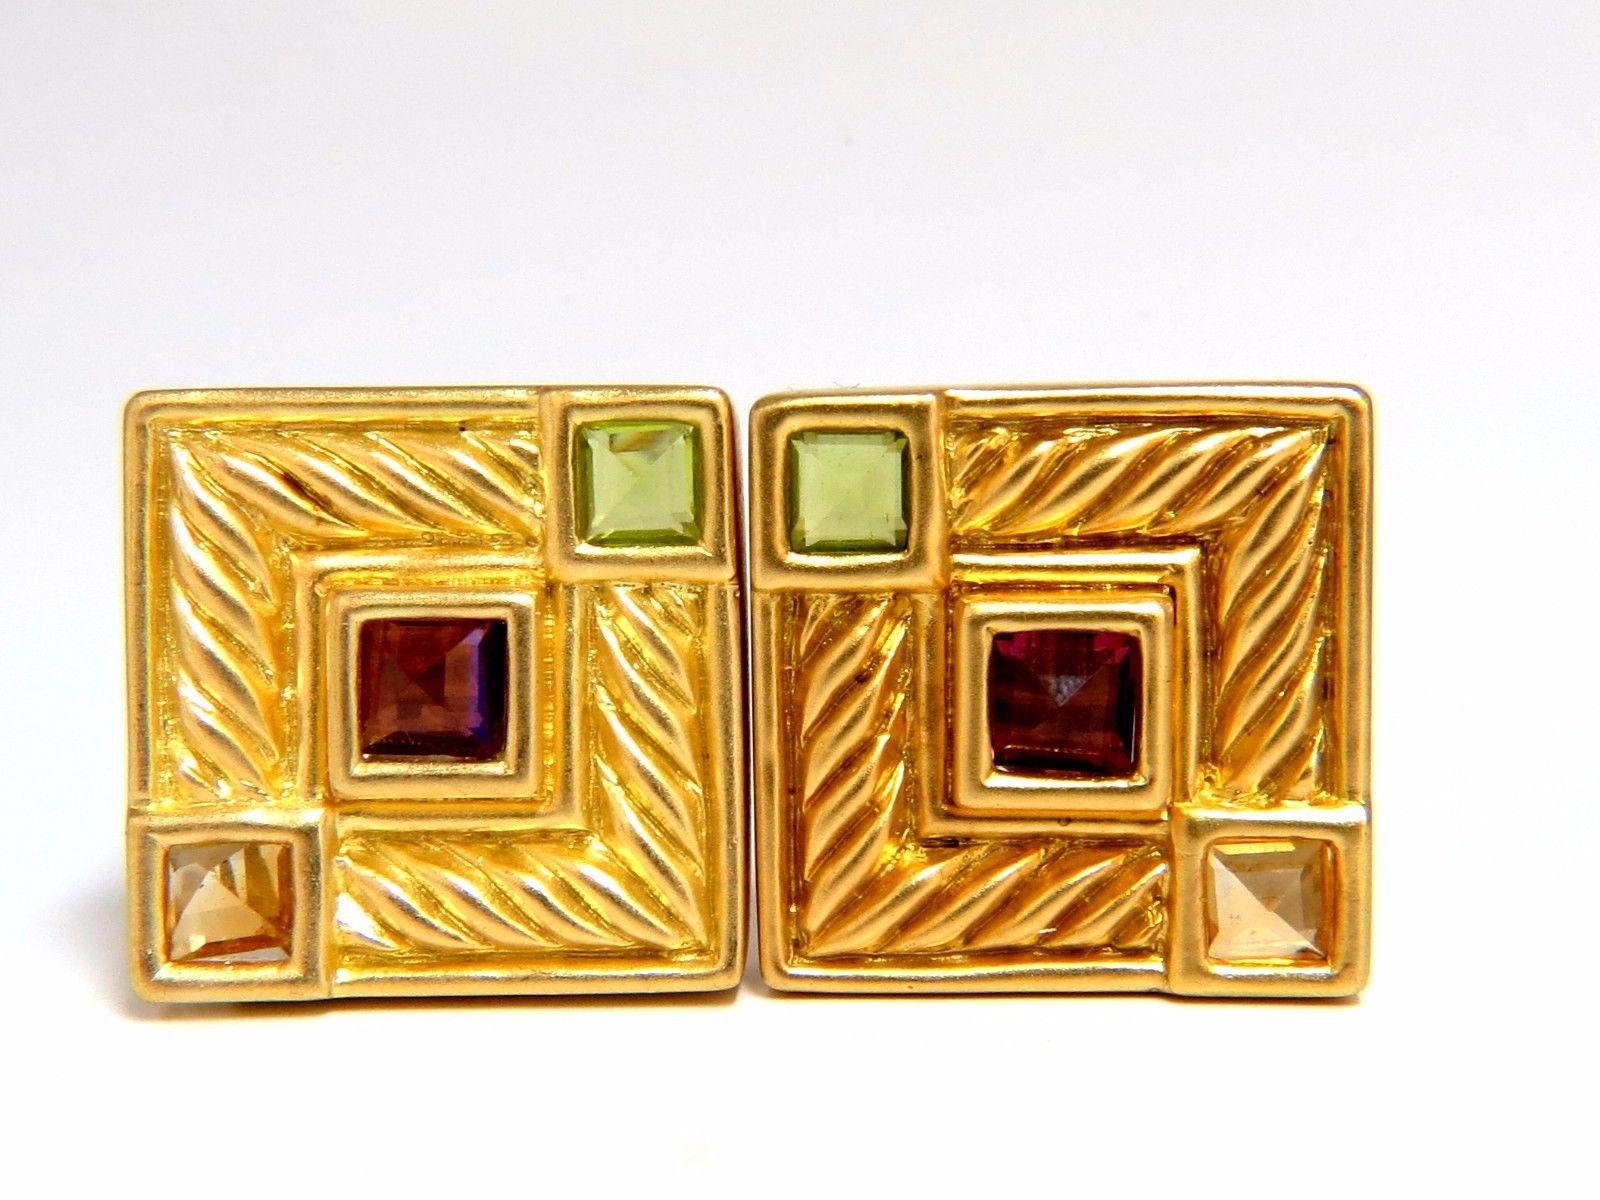 Designer: Ivan & Co.

4.00ct. Natural Peridot, Citrine & Tourmaline earrings

Clean Clarity, Vivid colors

Square Emerald cuts 

Earrings:

.94 X .94inch

31.5 grams.

18kt yellow gold 

Earrings are gorgeous made

$4500 Appraisal to accompany